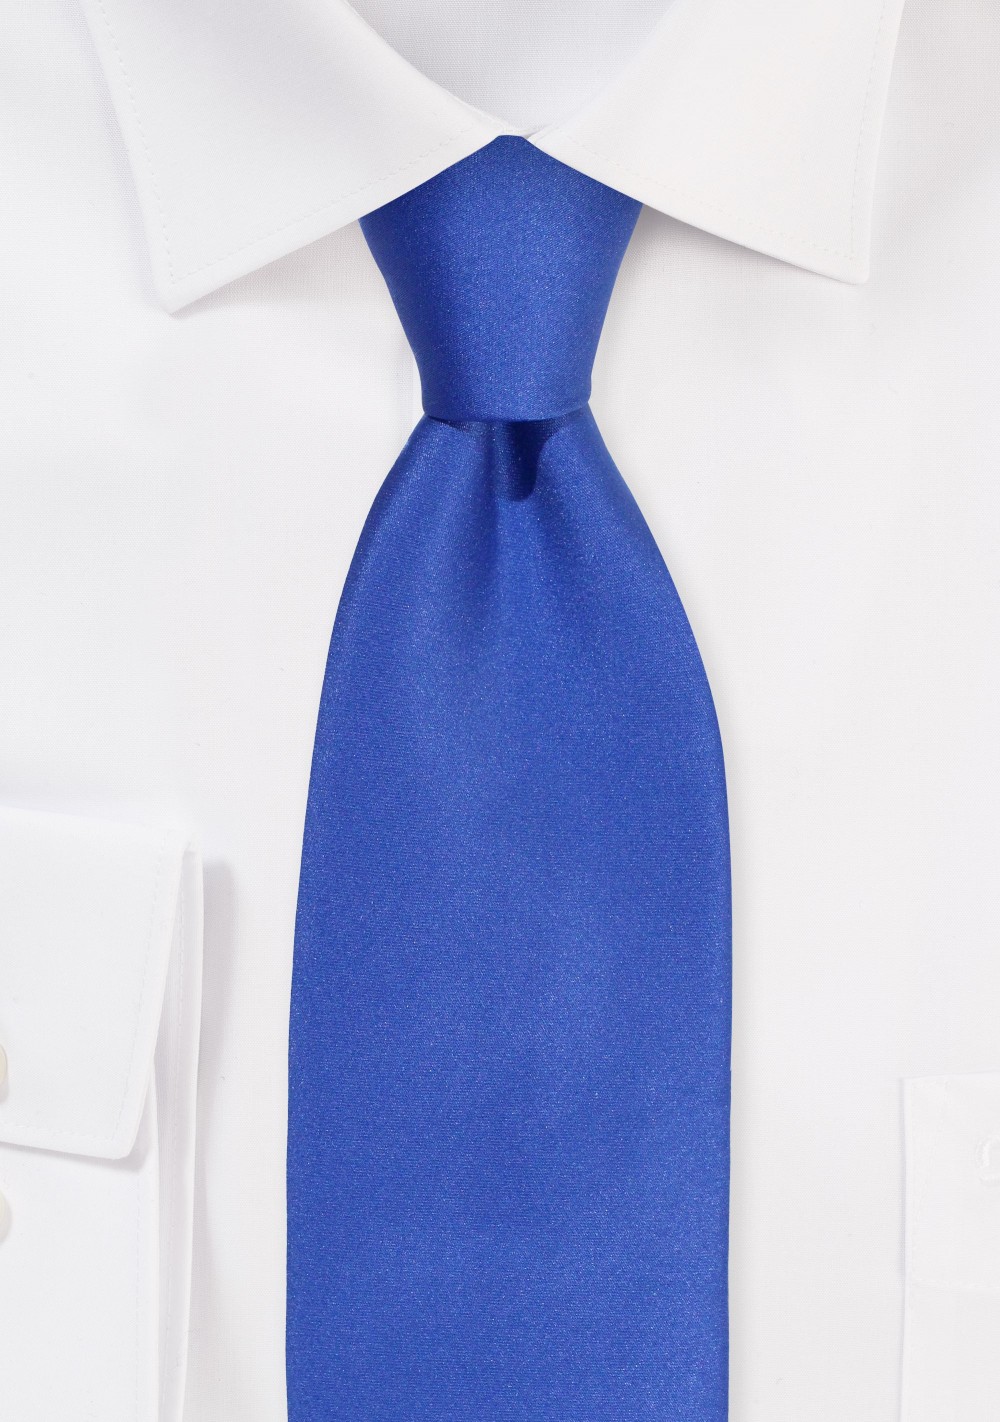 Satin Tie in Morning Glory Blue